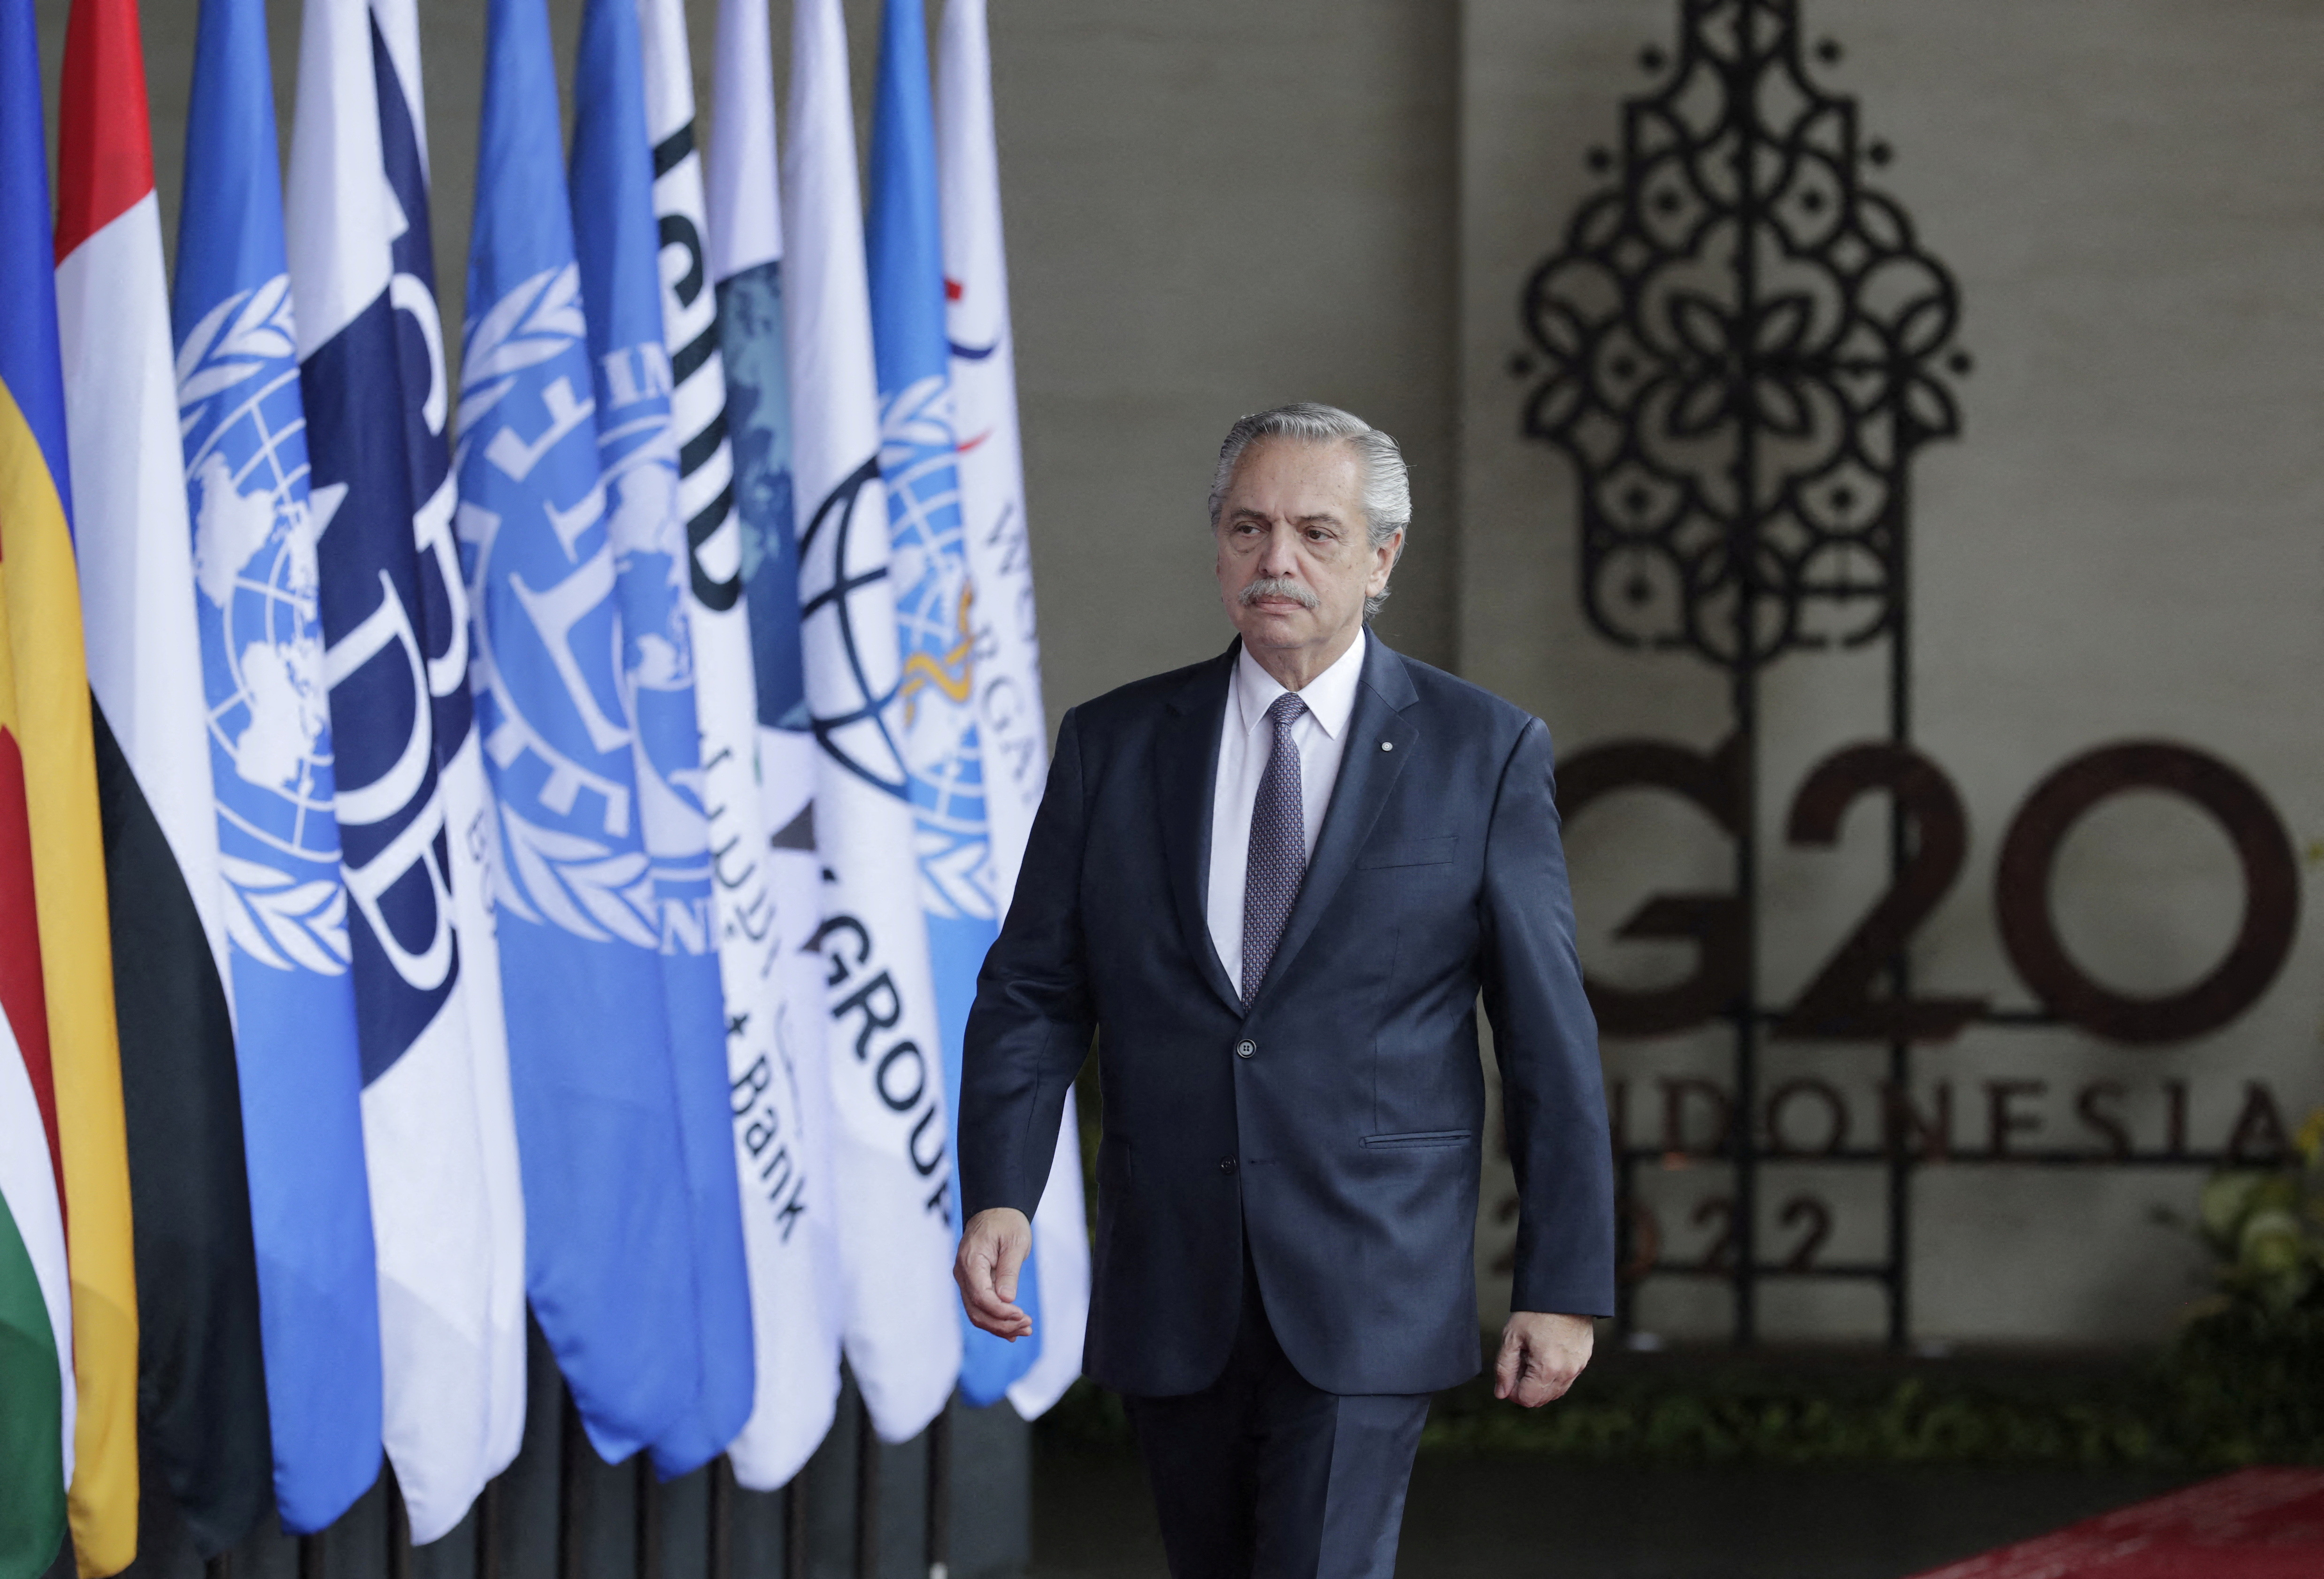 Argentina's President Alberto Fernandez arrive for the G20 Leaders' Summit in Bali, Indonesia, 15 November 2022. The 17th Group of Twenty (G20) Heads of State and Government Summit runs from 15 to 16 November 2022.  Mast Irham/Pool via REUTERS